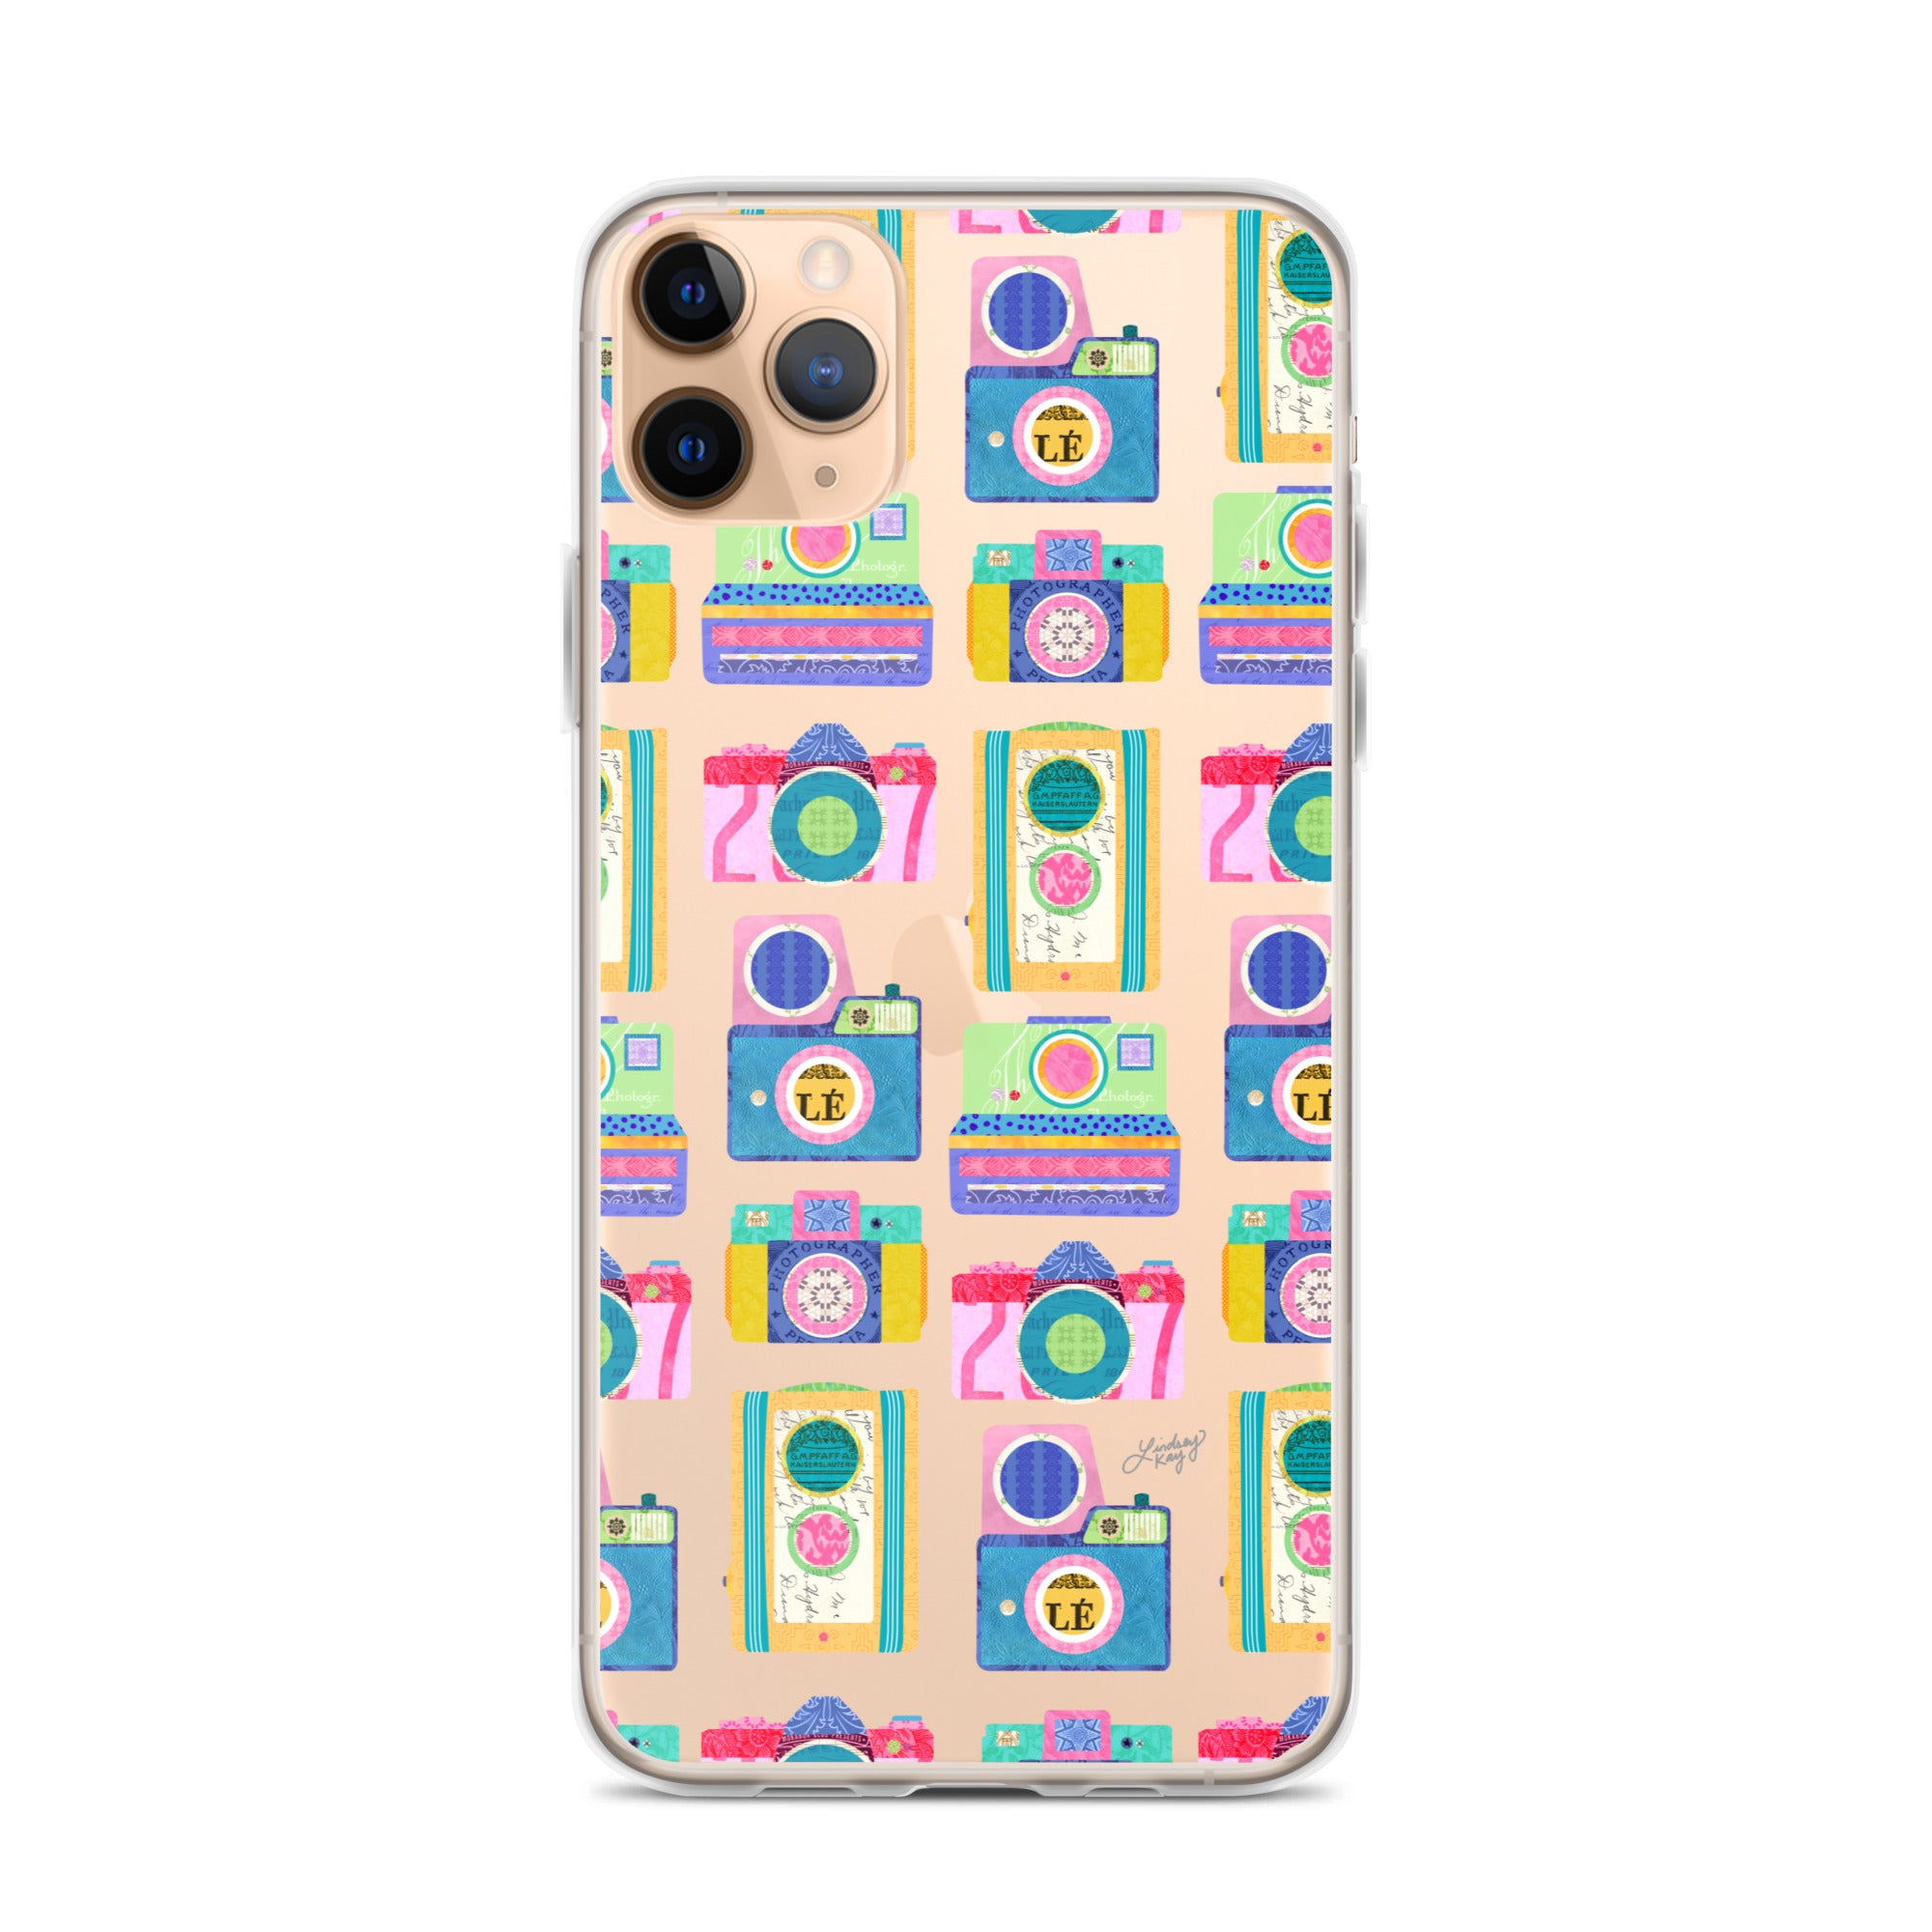 colorful camera polaroid illustration pattern clear iphone case cover trendy photographer gift lindsey kay collective